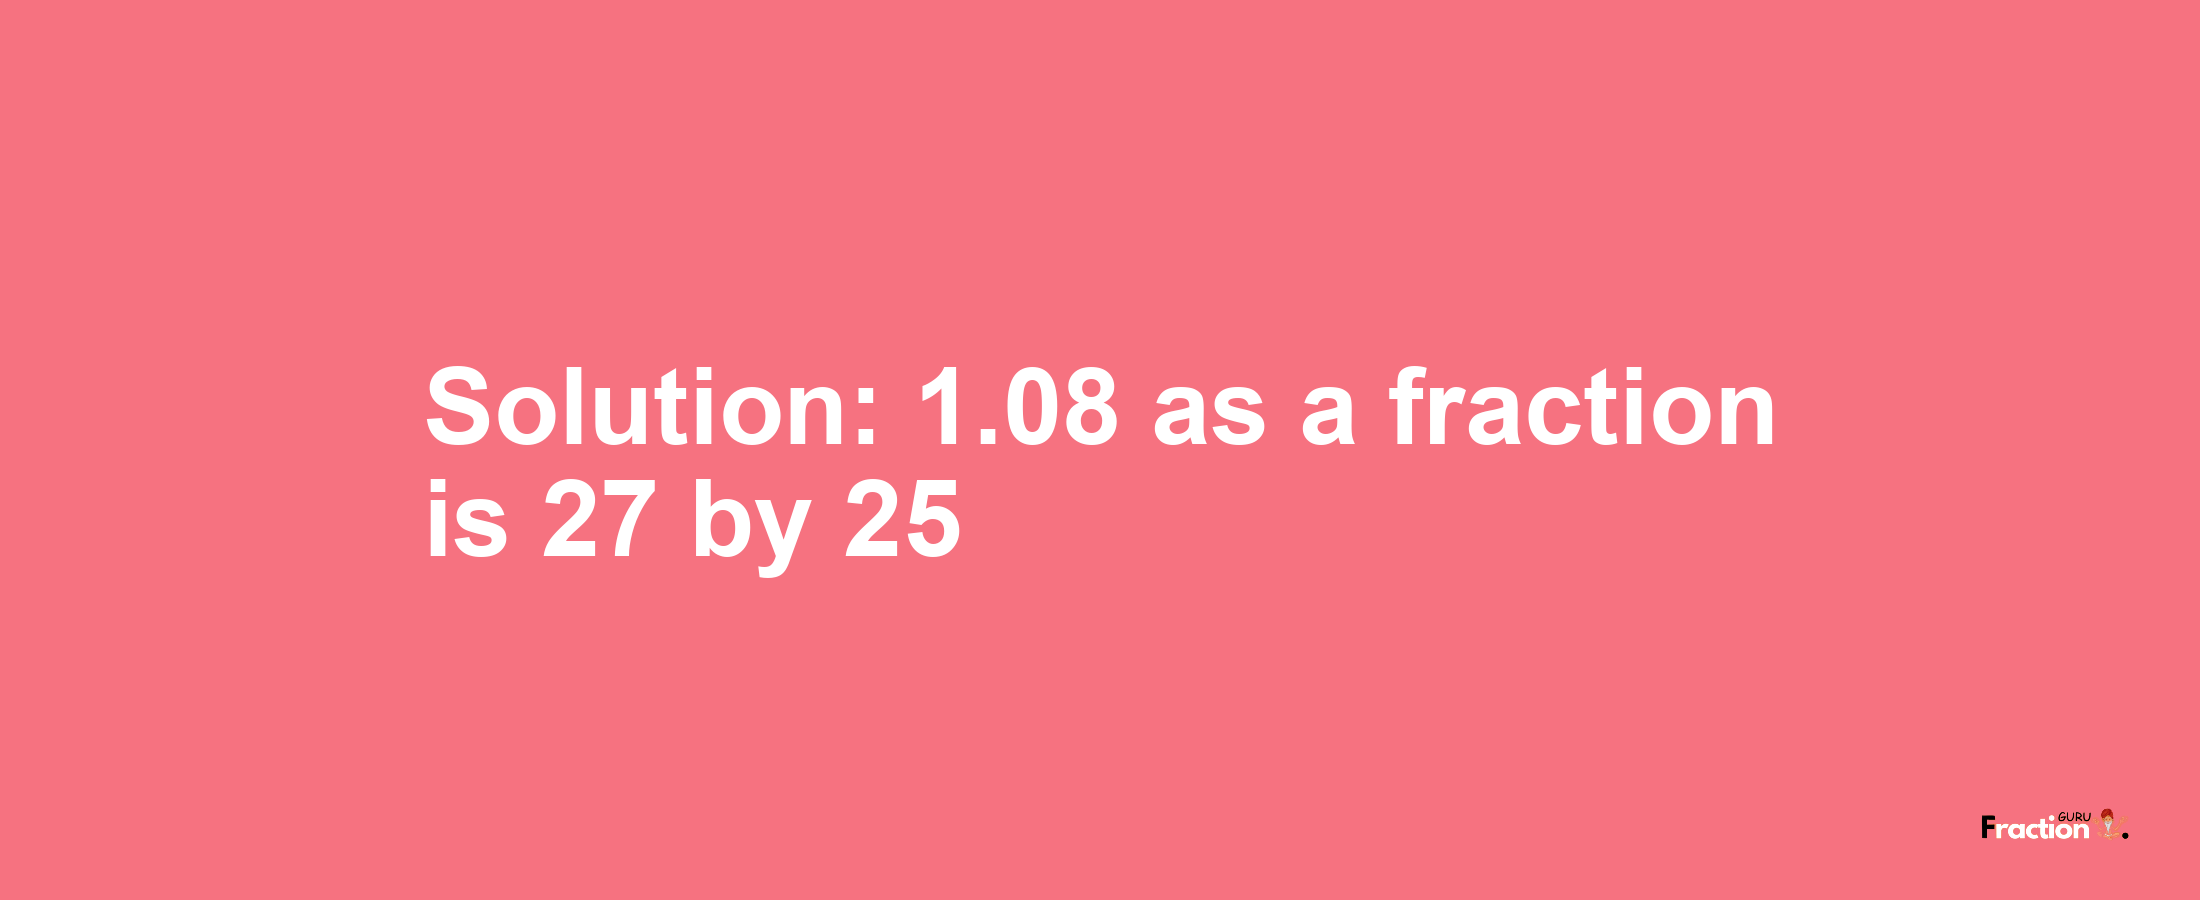 Solution:1.08 as a fraction is 27/25